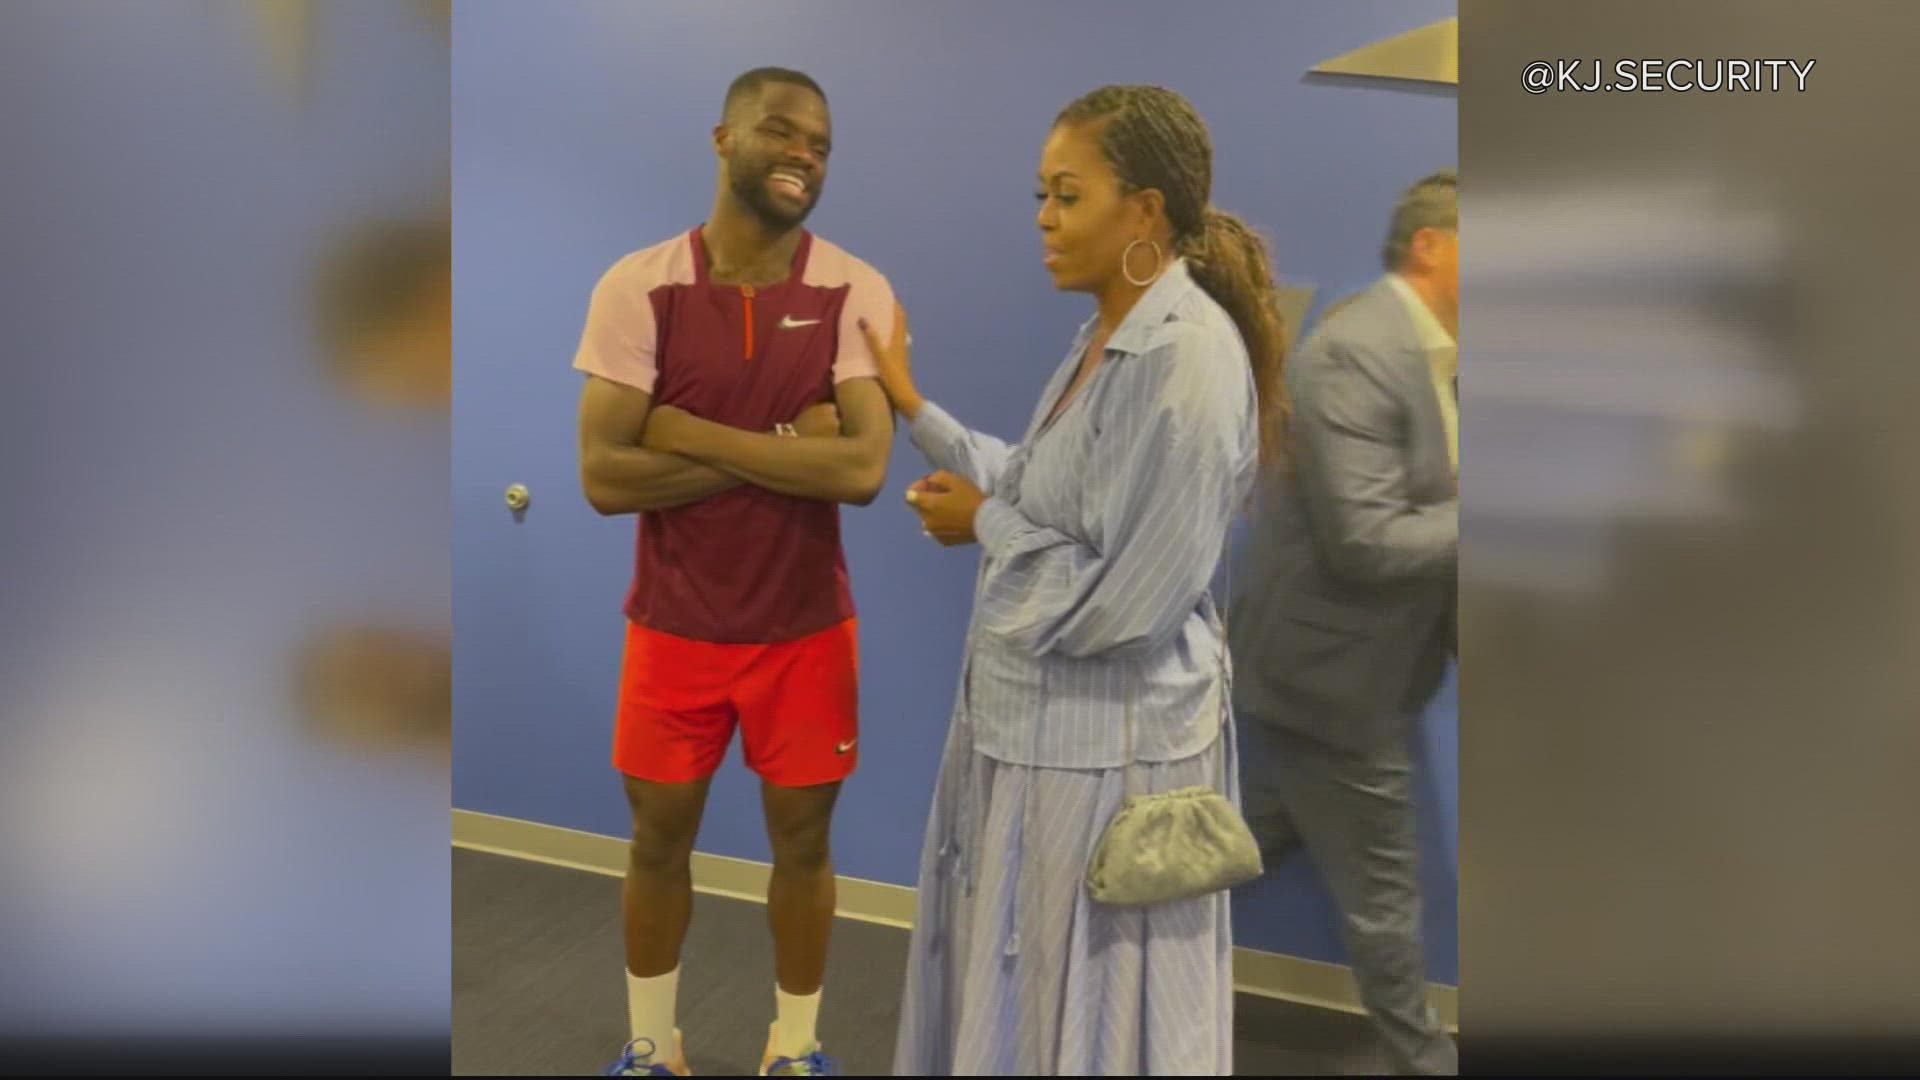 Hometown hero Frances Tiafoe met with First Lady Michelle Obama after his historic win at the U.S. Open